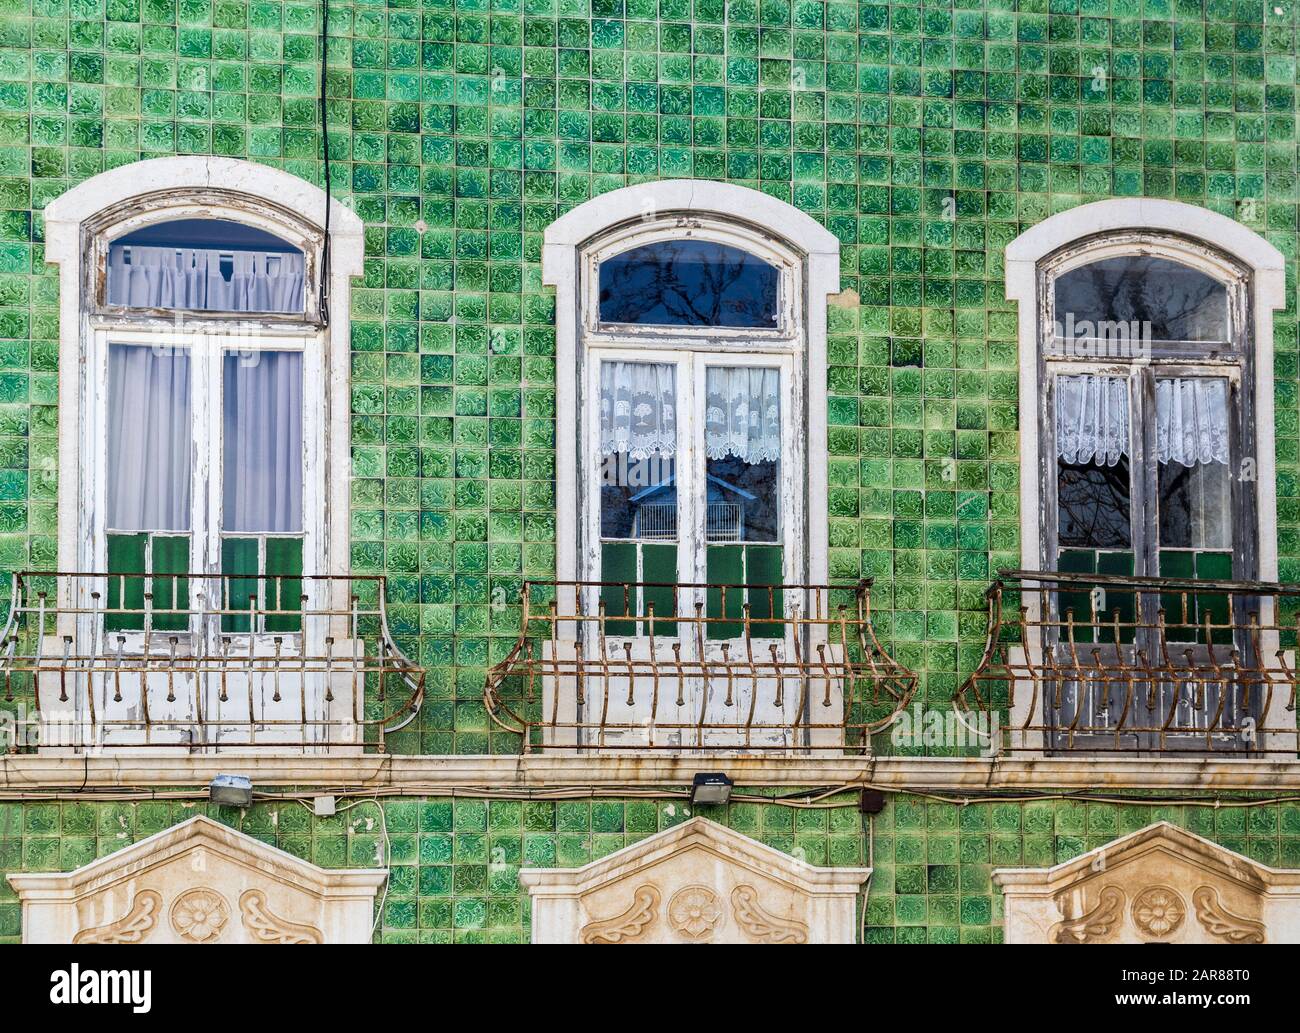 Patterned tiles on wall of house, Lagos, Algarve, Portugal Stock Photo